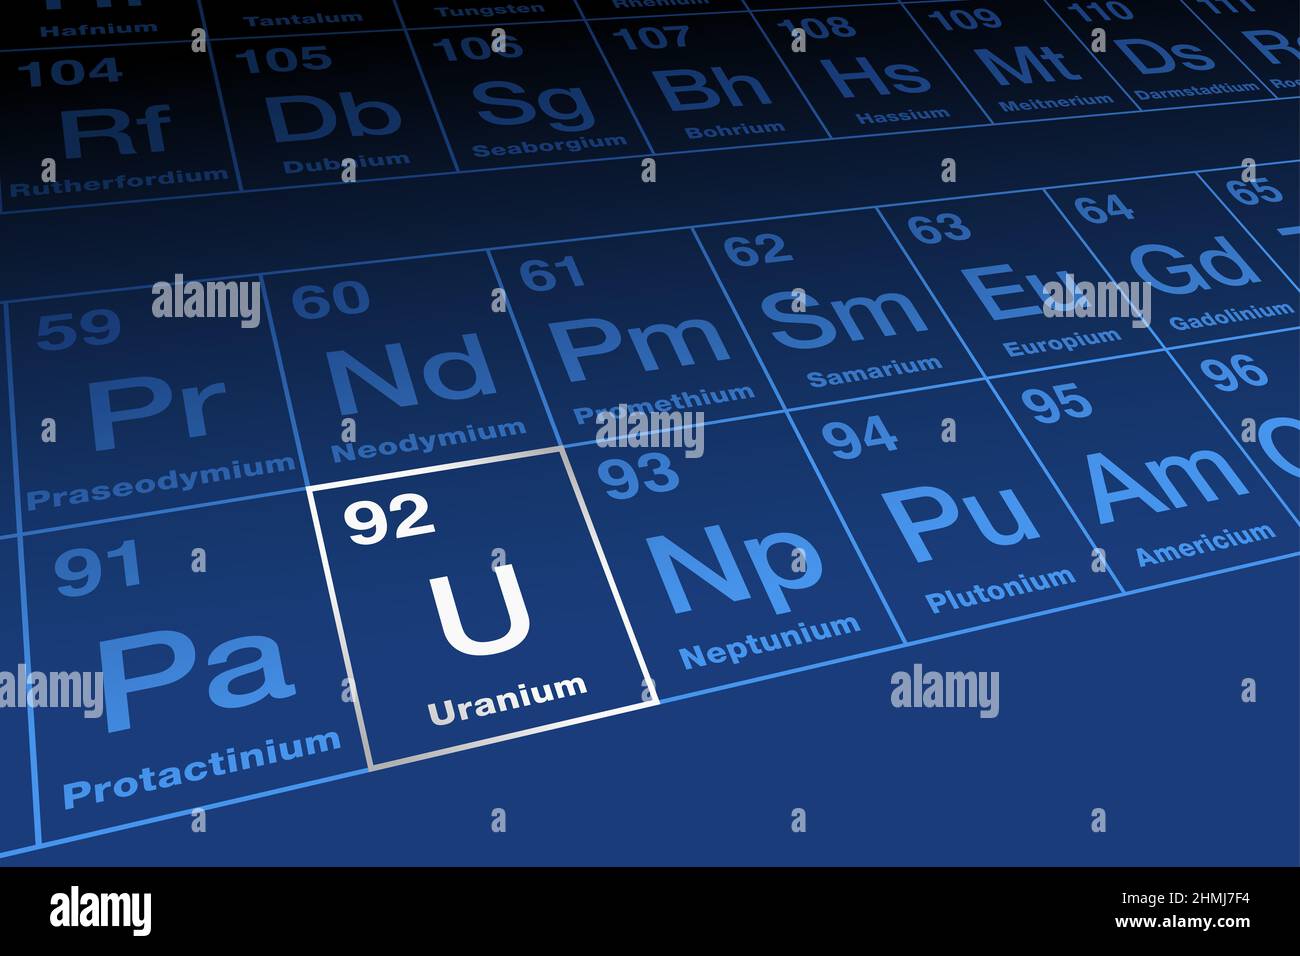 Uranium, chemical element on the periodic table of elements, in the actinide series. Radioactive metal with the element symbol U and atomic number 92. Stock Photo